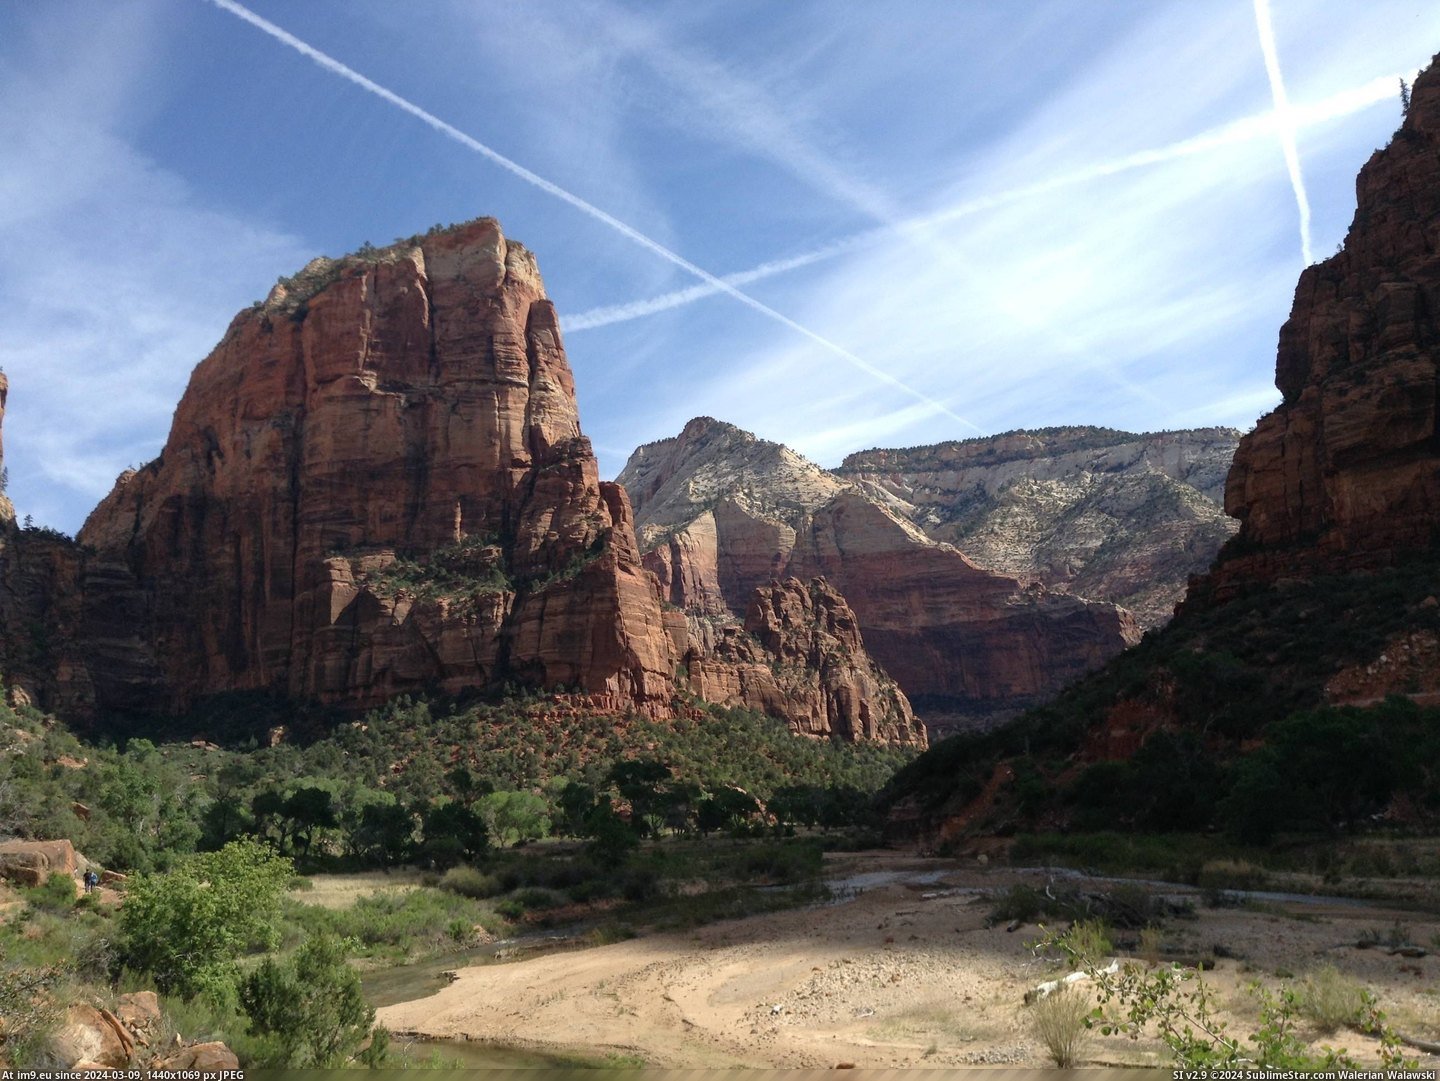 #Day #Park #National #Hike #Landing #Zion #2592x1936 #Angel #Gorgeous #Spring [Earthporn] View of Angel's Landing on a gorgeous spring day - Zion National Park. What a hike! [2592x1936] Pic. (Image of album My r/EARTHPORN favs))